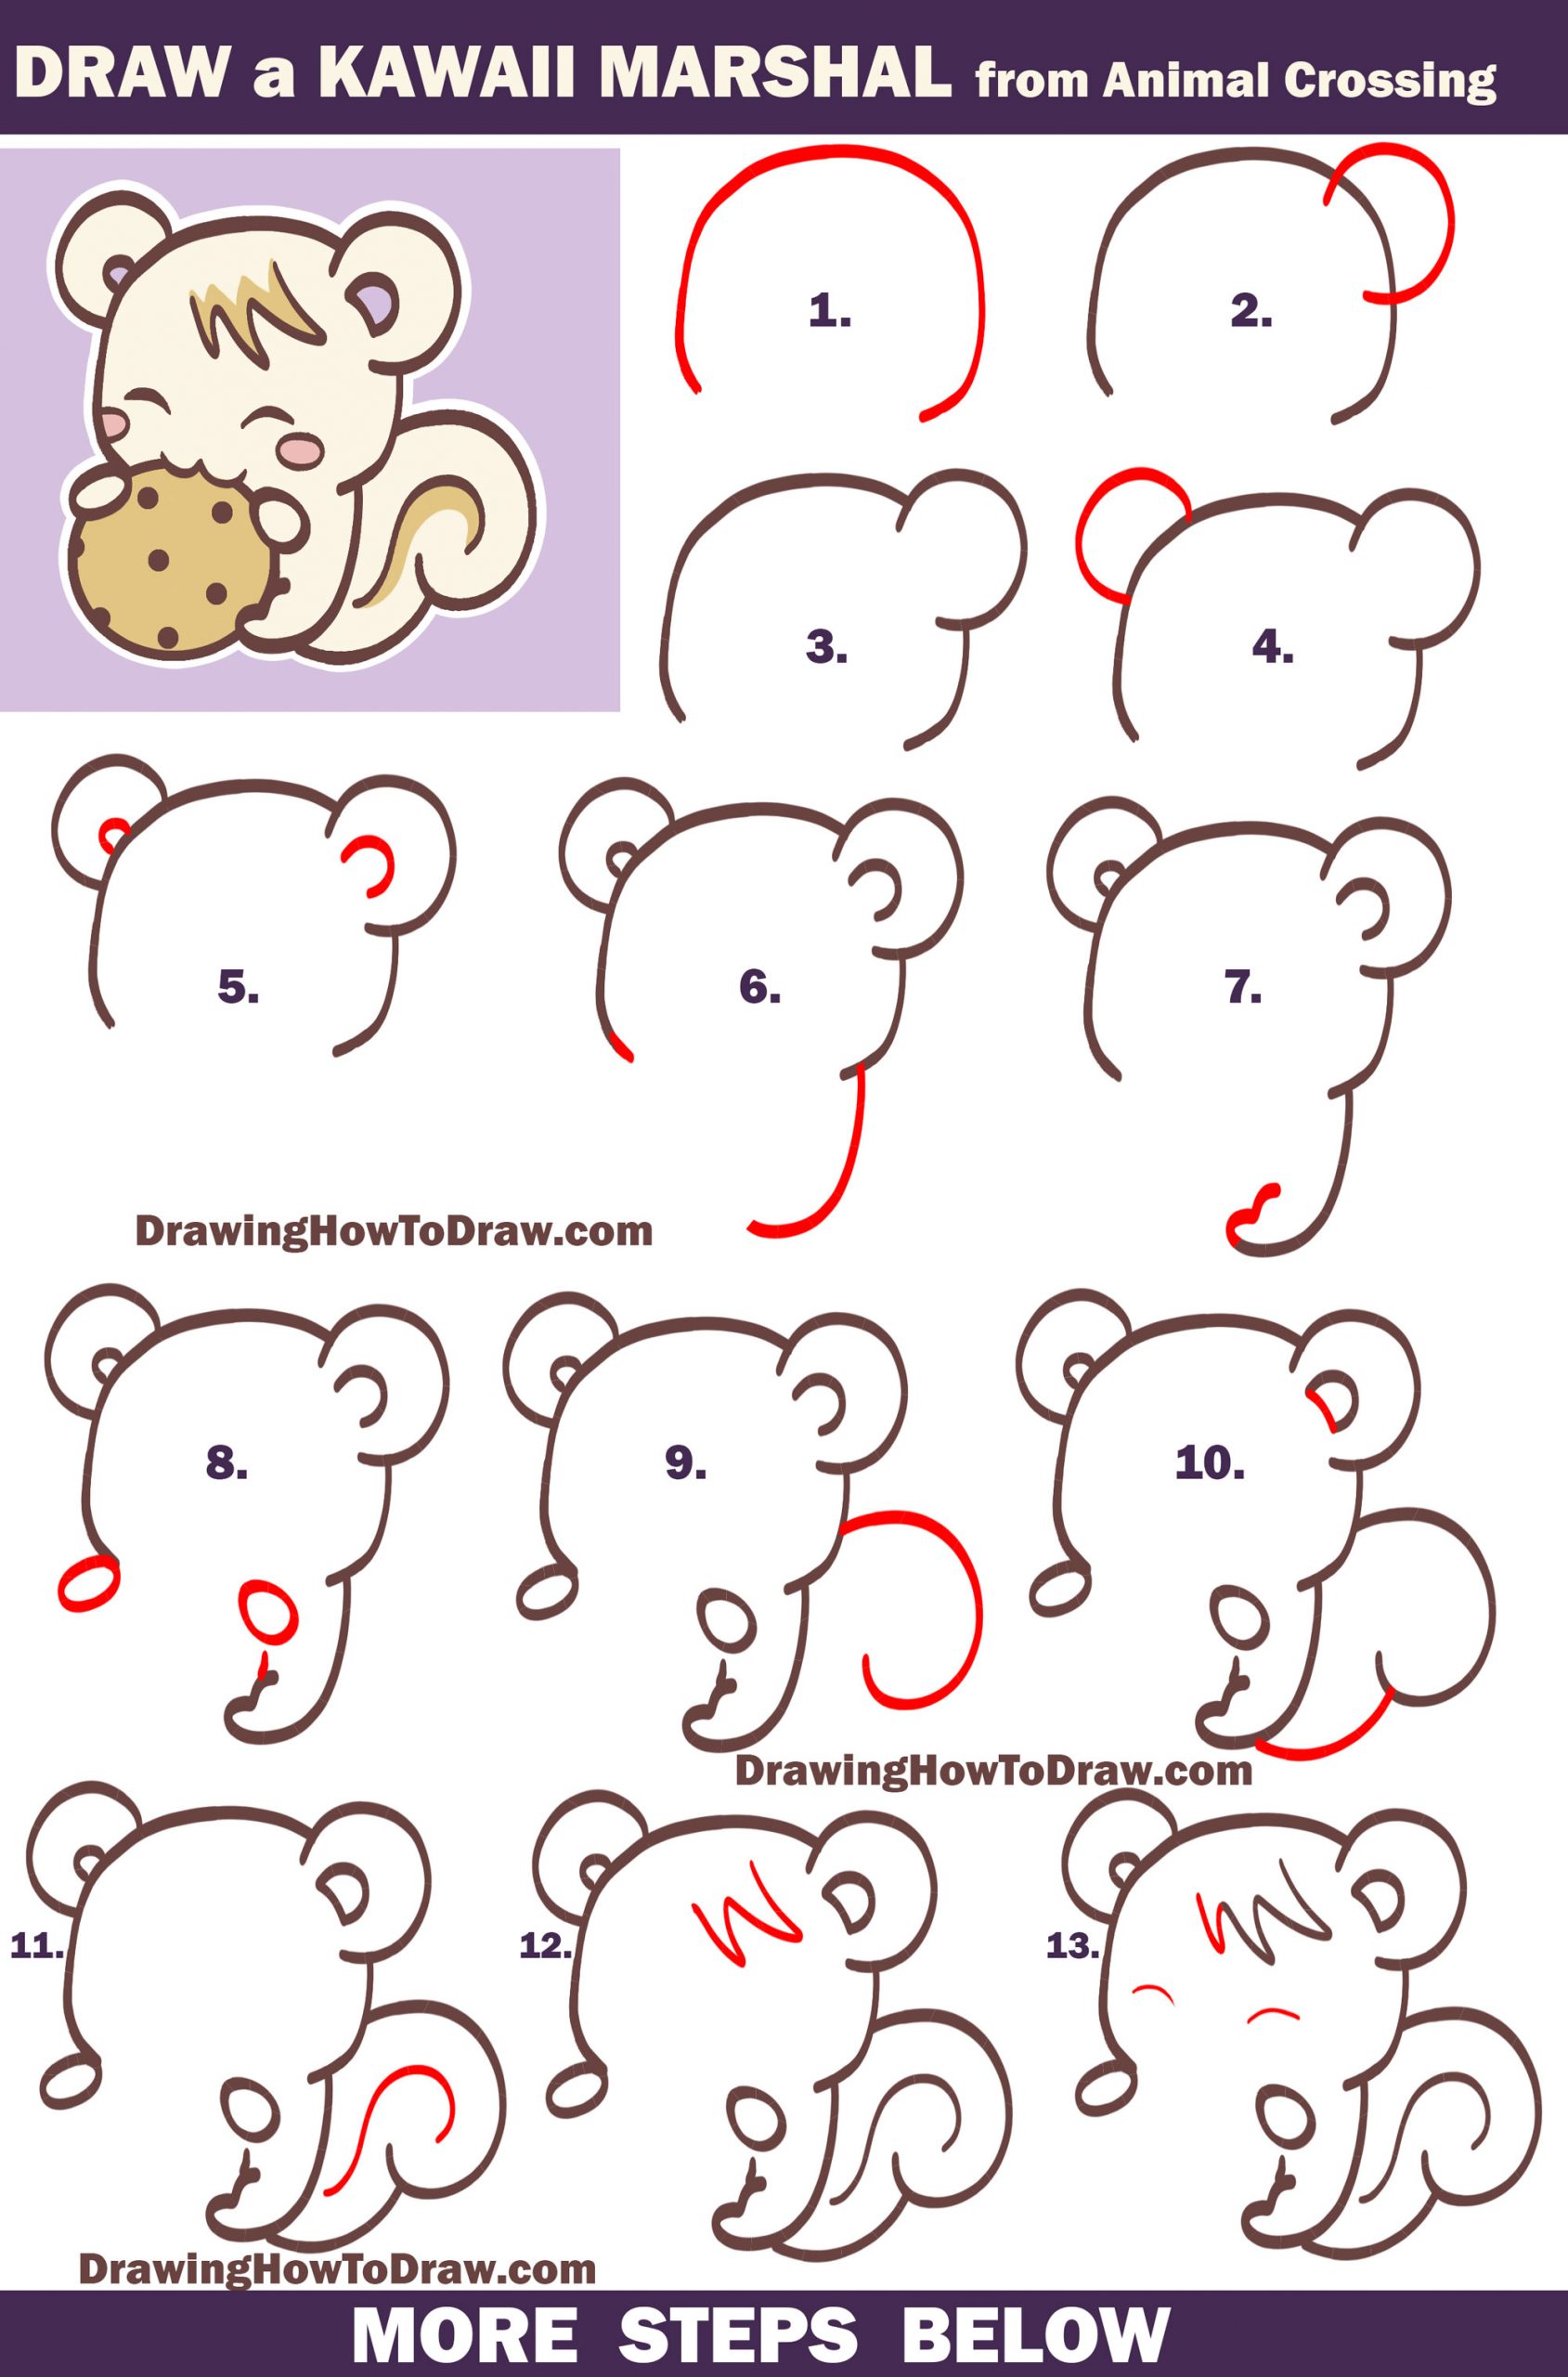 Learn How to Draw Marshal the Squirrel from Animal Crossing New Leaf (Cute, Kawaii, Chibi) Easy Step by Step Tutorial